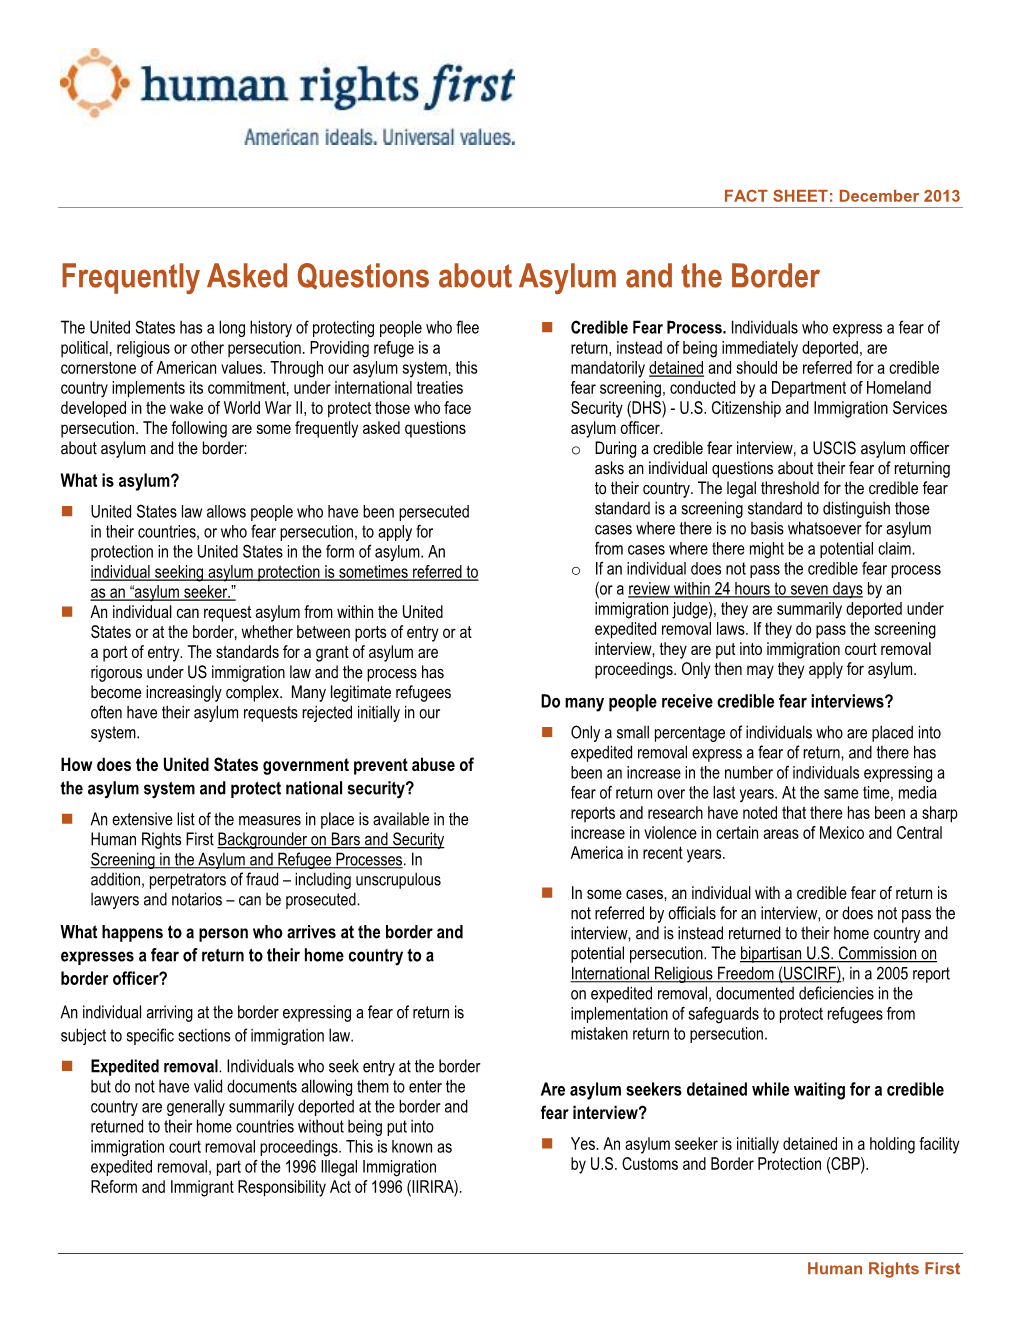 Frequently Asked Questions About Asylum and the Border